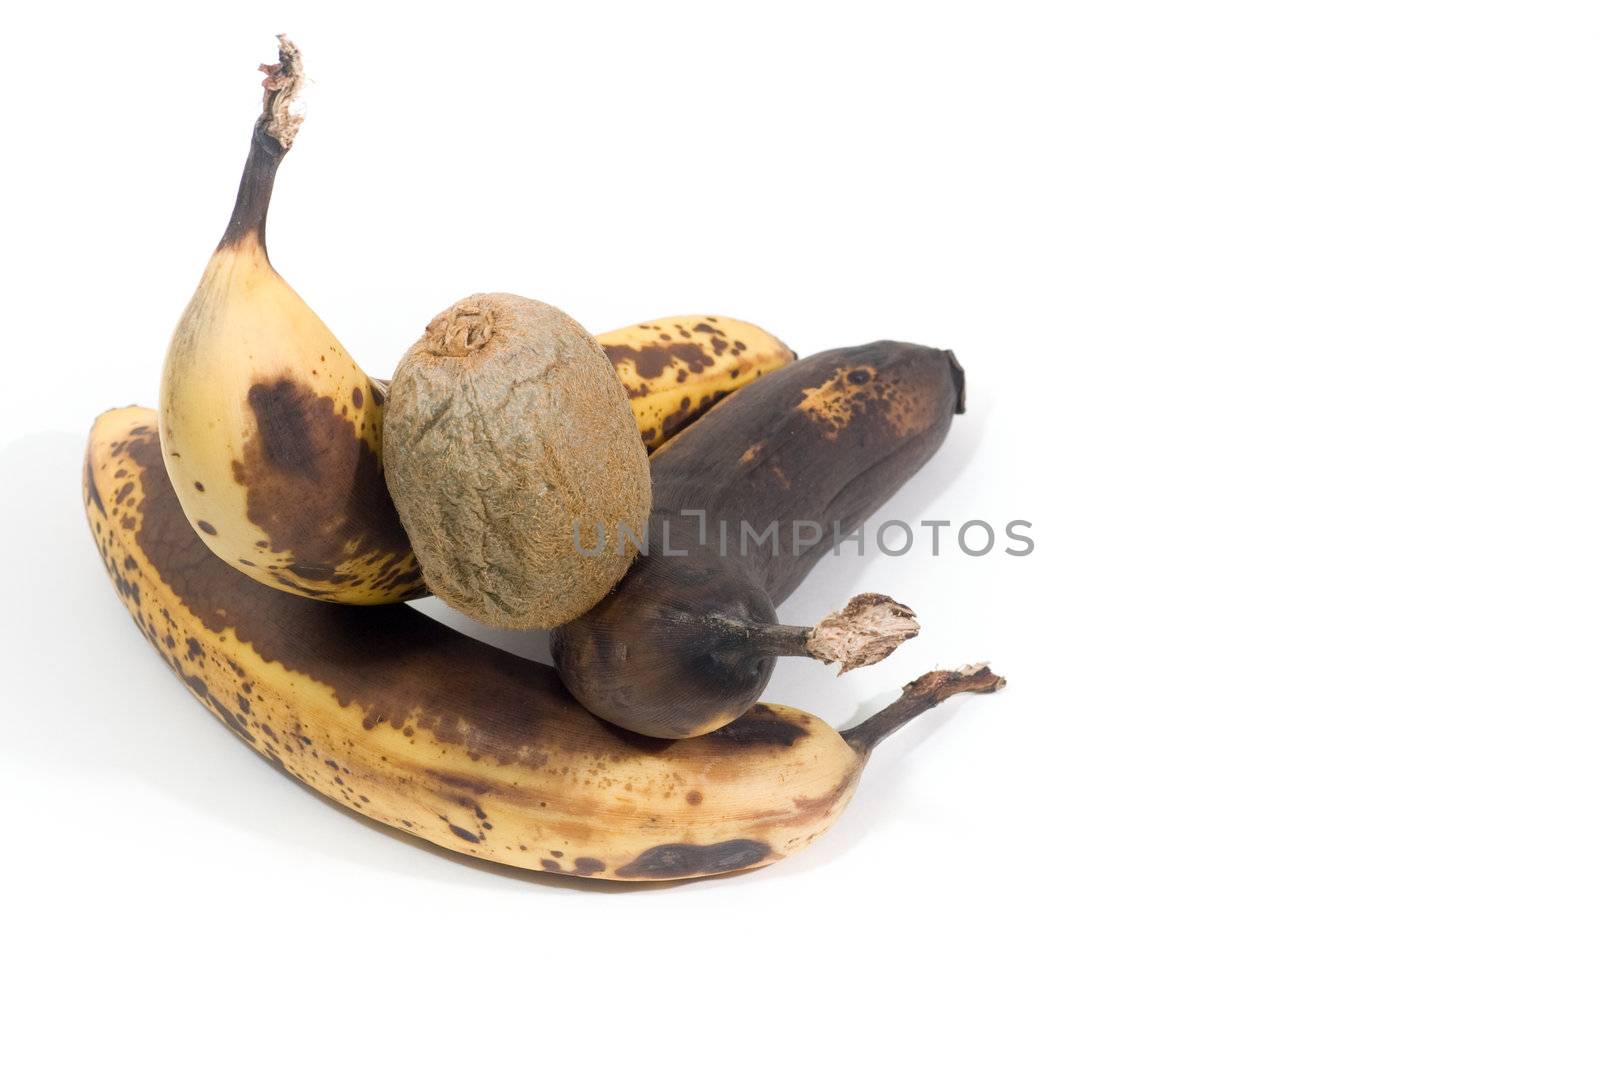 3 over-ripened bananas and a kiwi, isolated on white.